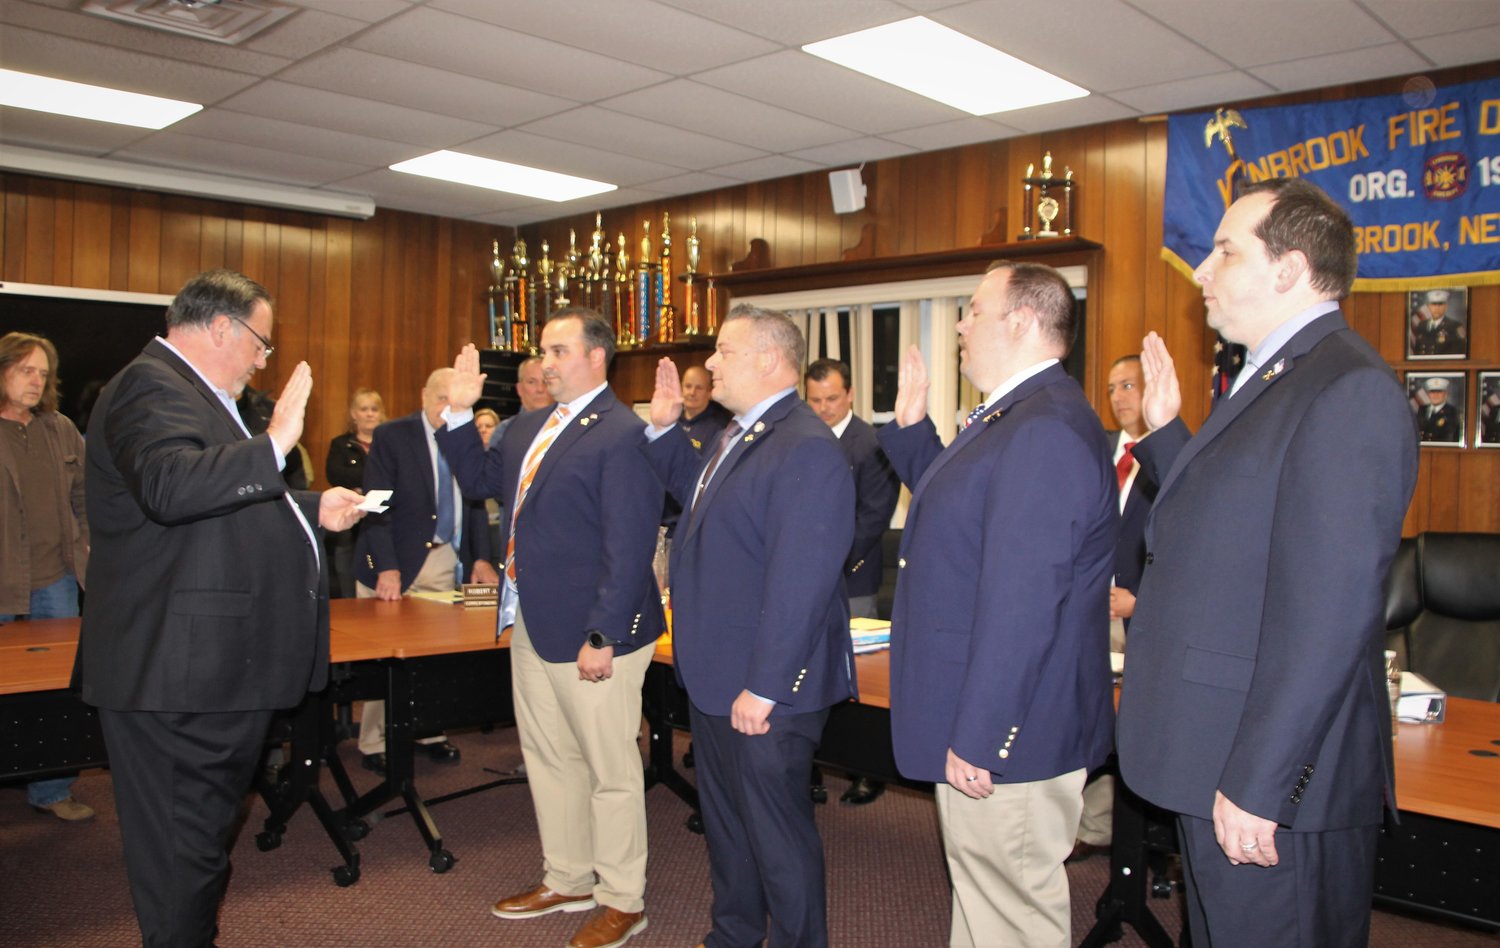 New Lynbrook Fire Department Chief Chris Kelly, second from left, was sworn into his new position by Deputy Mayor Michael Hawxhurst on April 19 along with First Assistant Chief Danny Ambrosio, Second Assistant Chief Scott Bien and Third Assistant Chief Clayton Murphy.